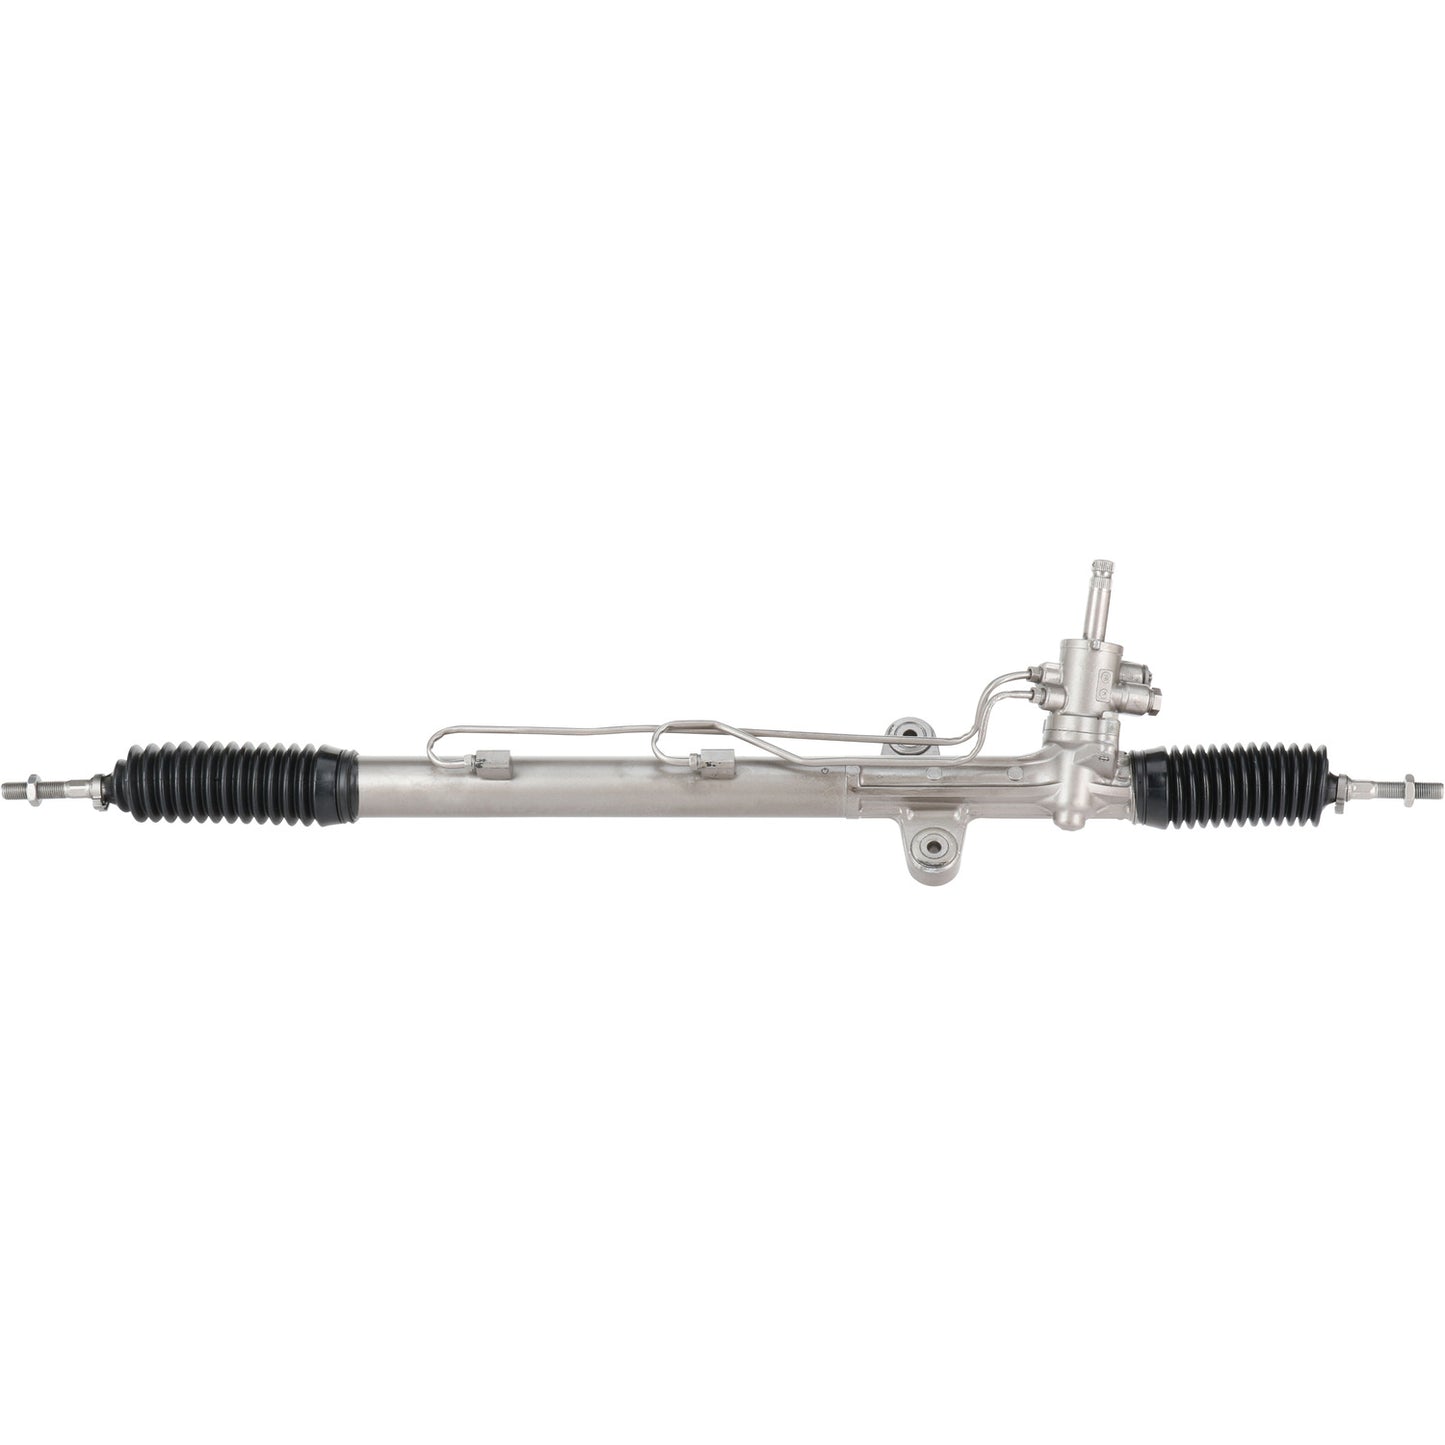 Rack and Pinion Assembly - MAVAL - Hydraulic Power - Remanufactured - 9312M